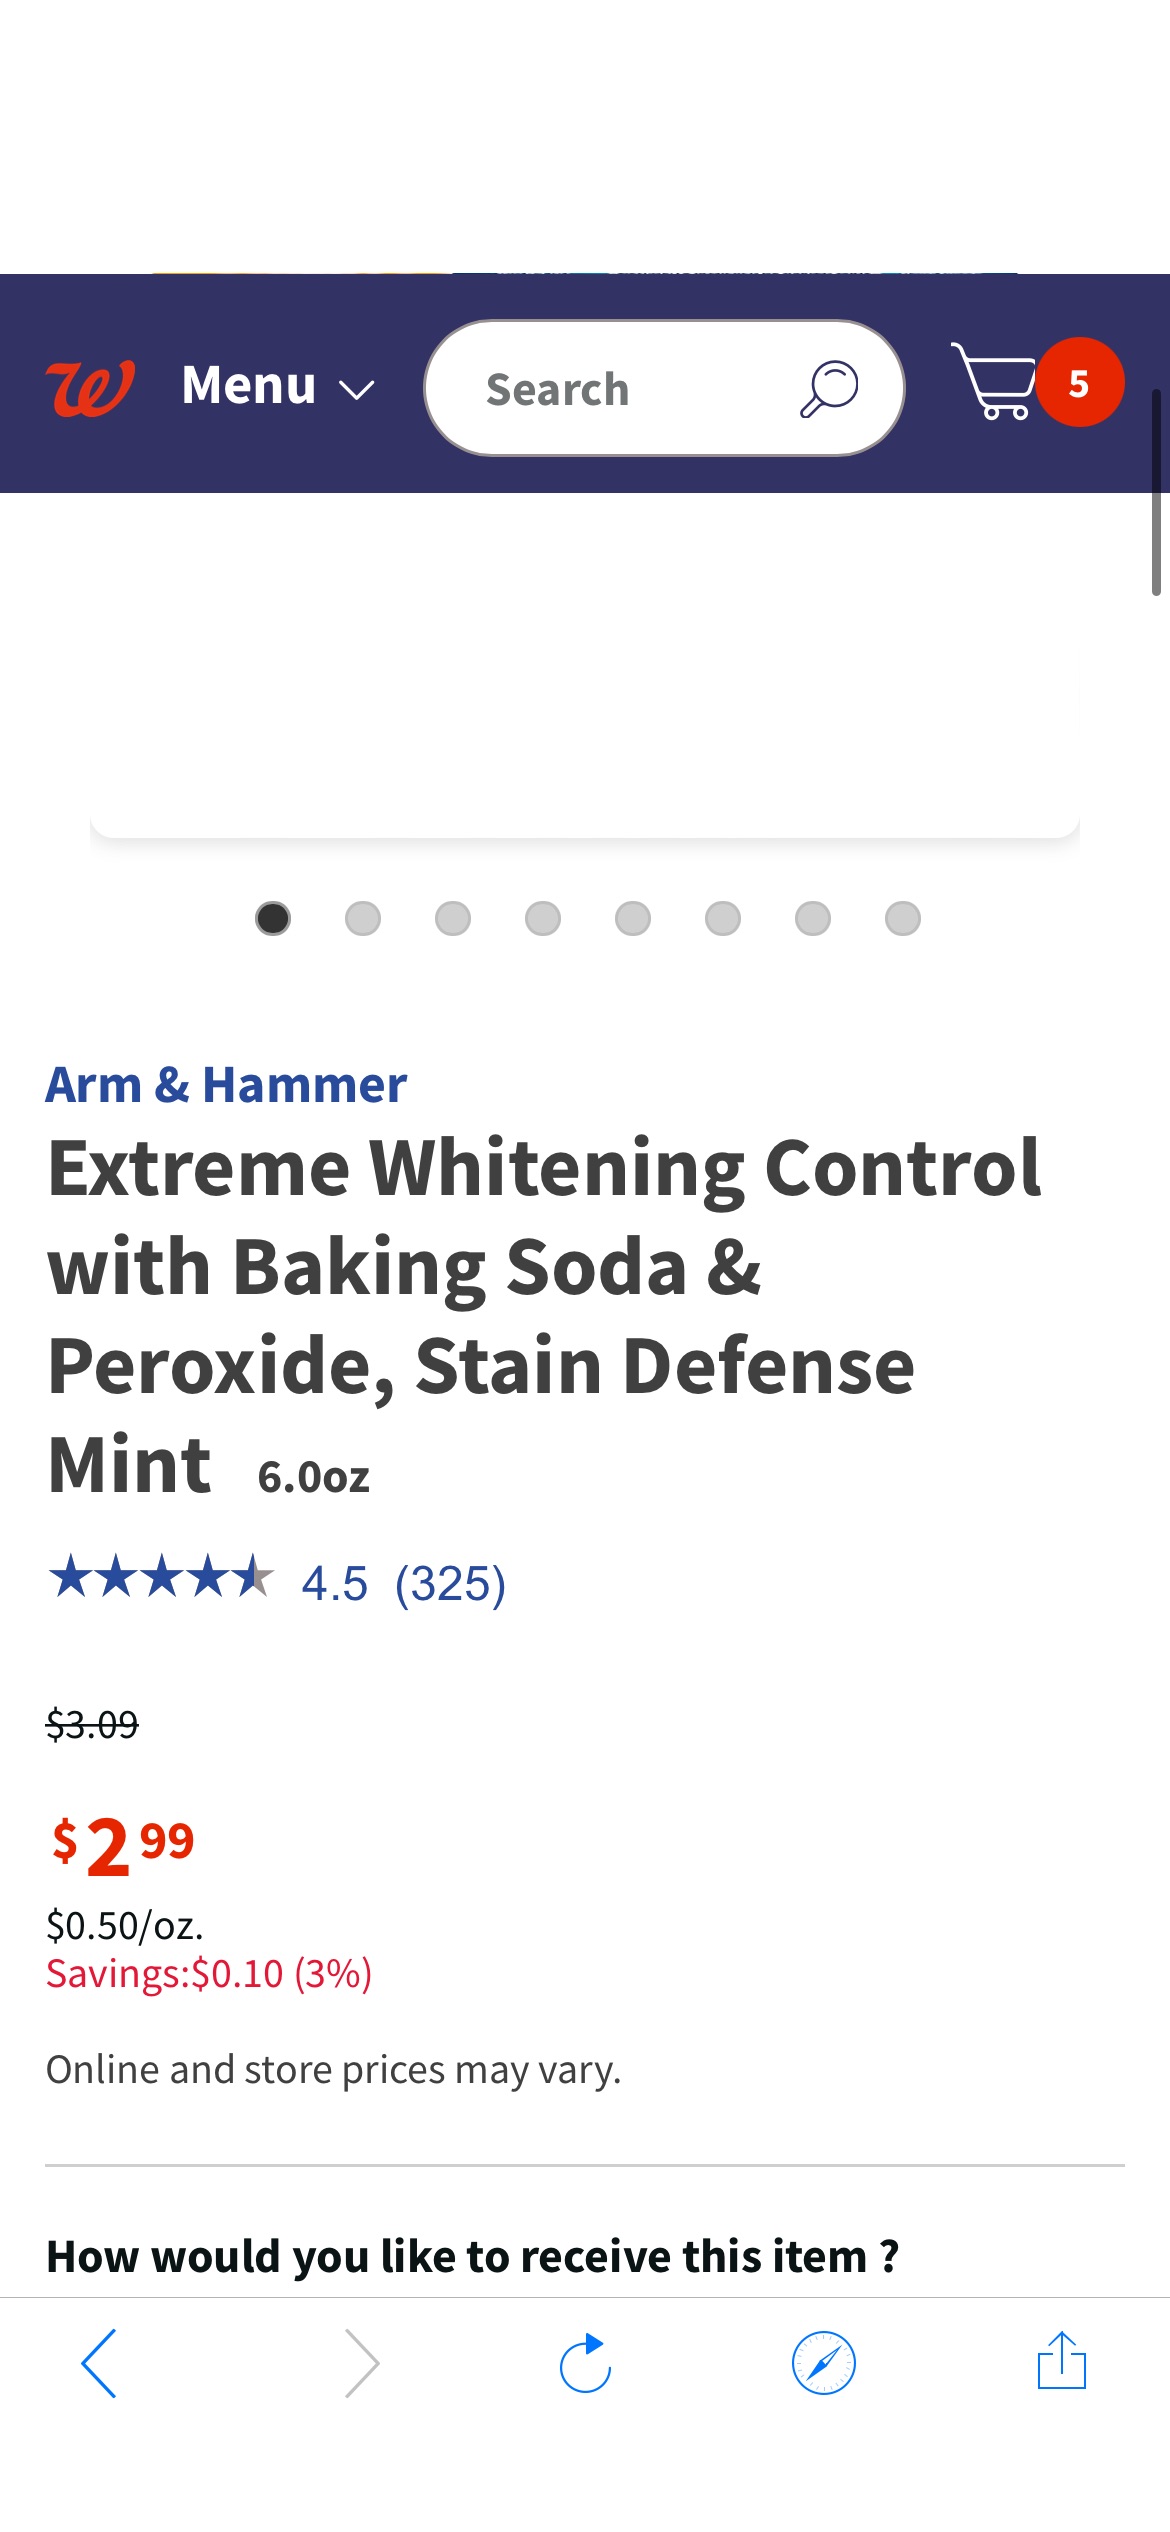 Arm & Hammer Extreme Whitening Control with Baking Soda & Peroxide, Stain Defense Mint | Walgreens